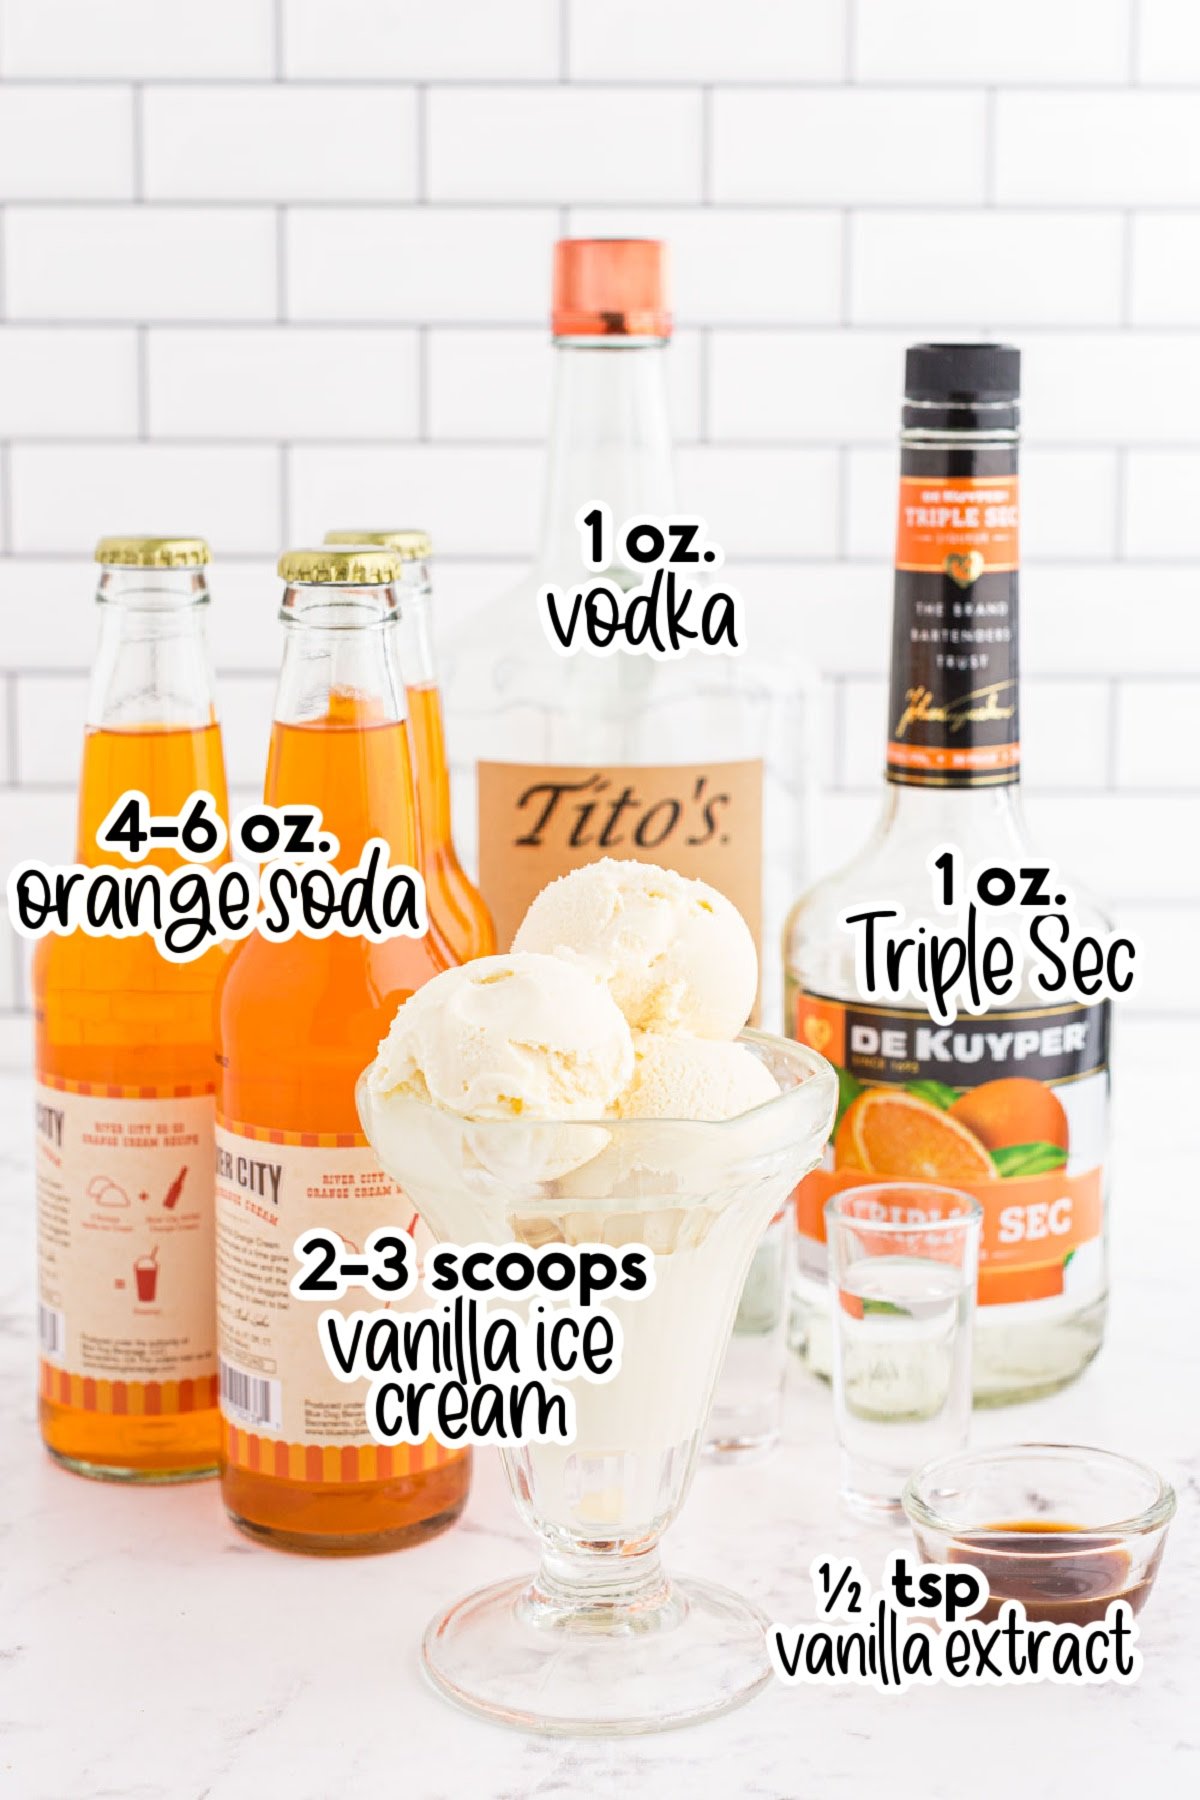 Jars of orange soda, Triple Sec, and vodka and a bowl of vanilla ice cream - text labels for boozy creamsicle float ingredients.